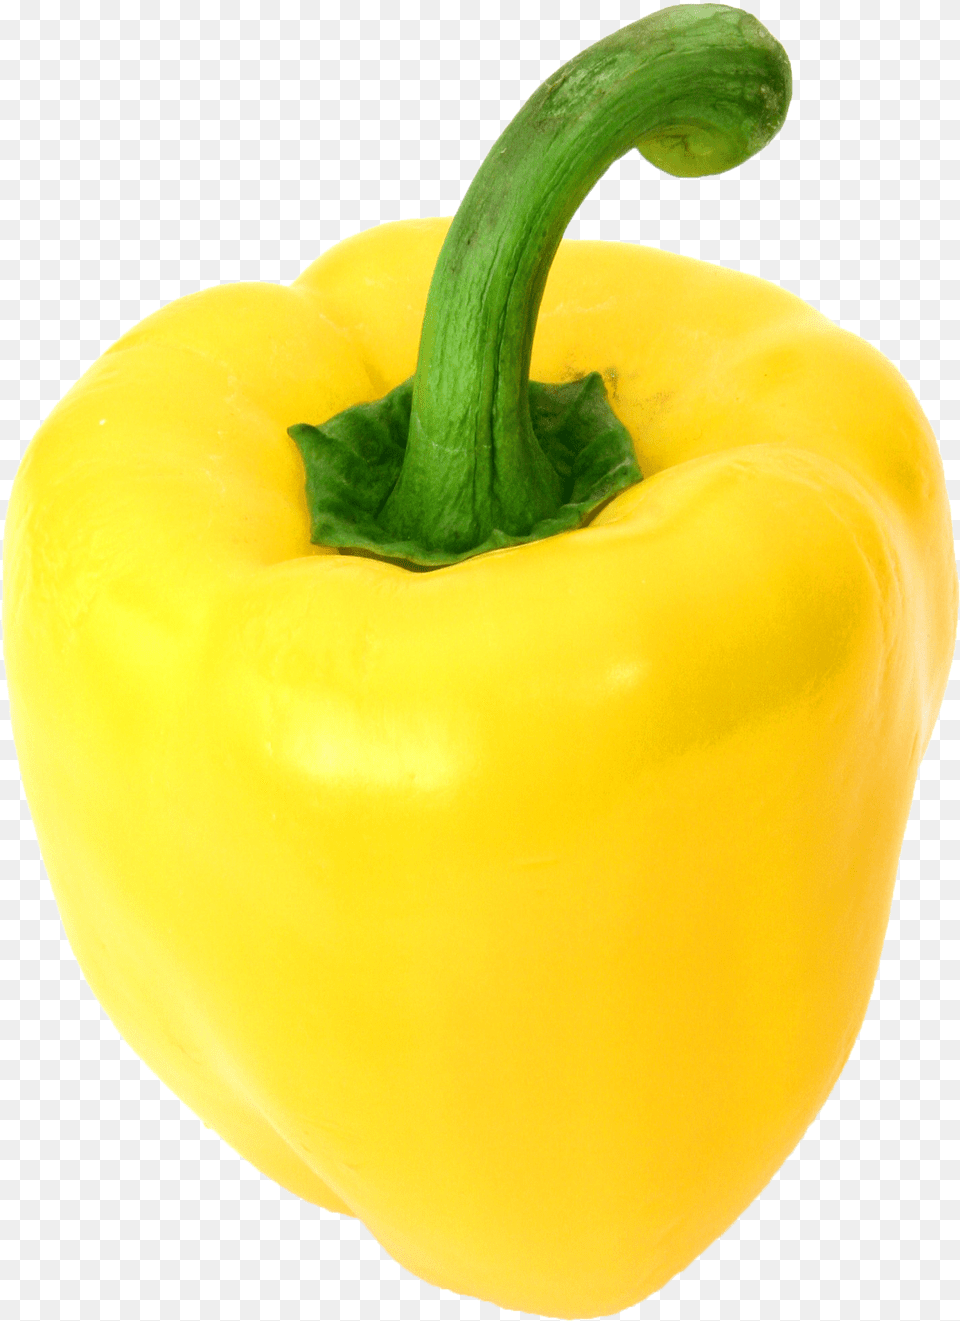 Bell Pepper Images Transparent Yellow Pepper, Bell Pepper, Food, Plant, Produce Free Png